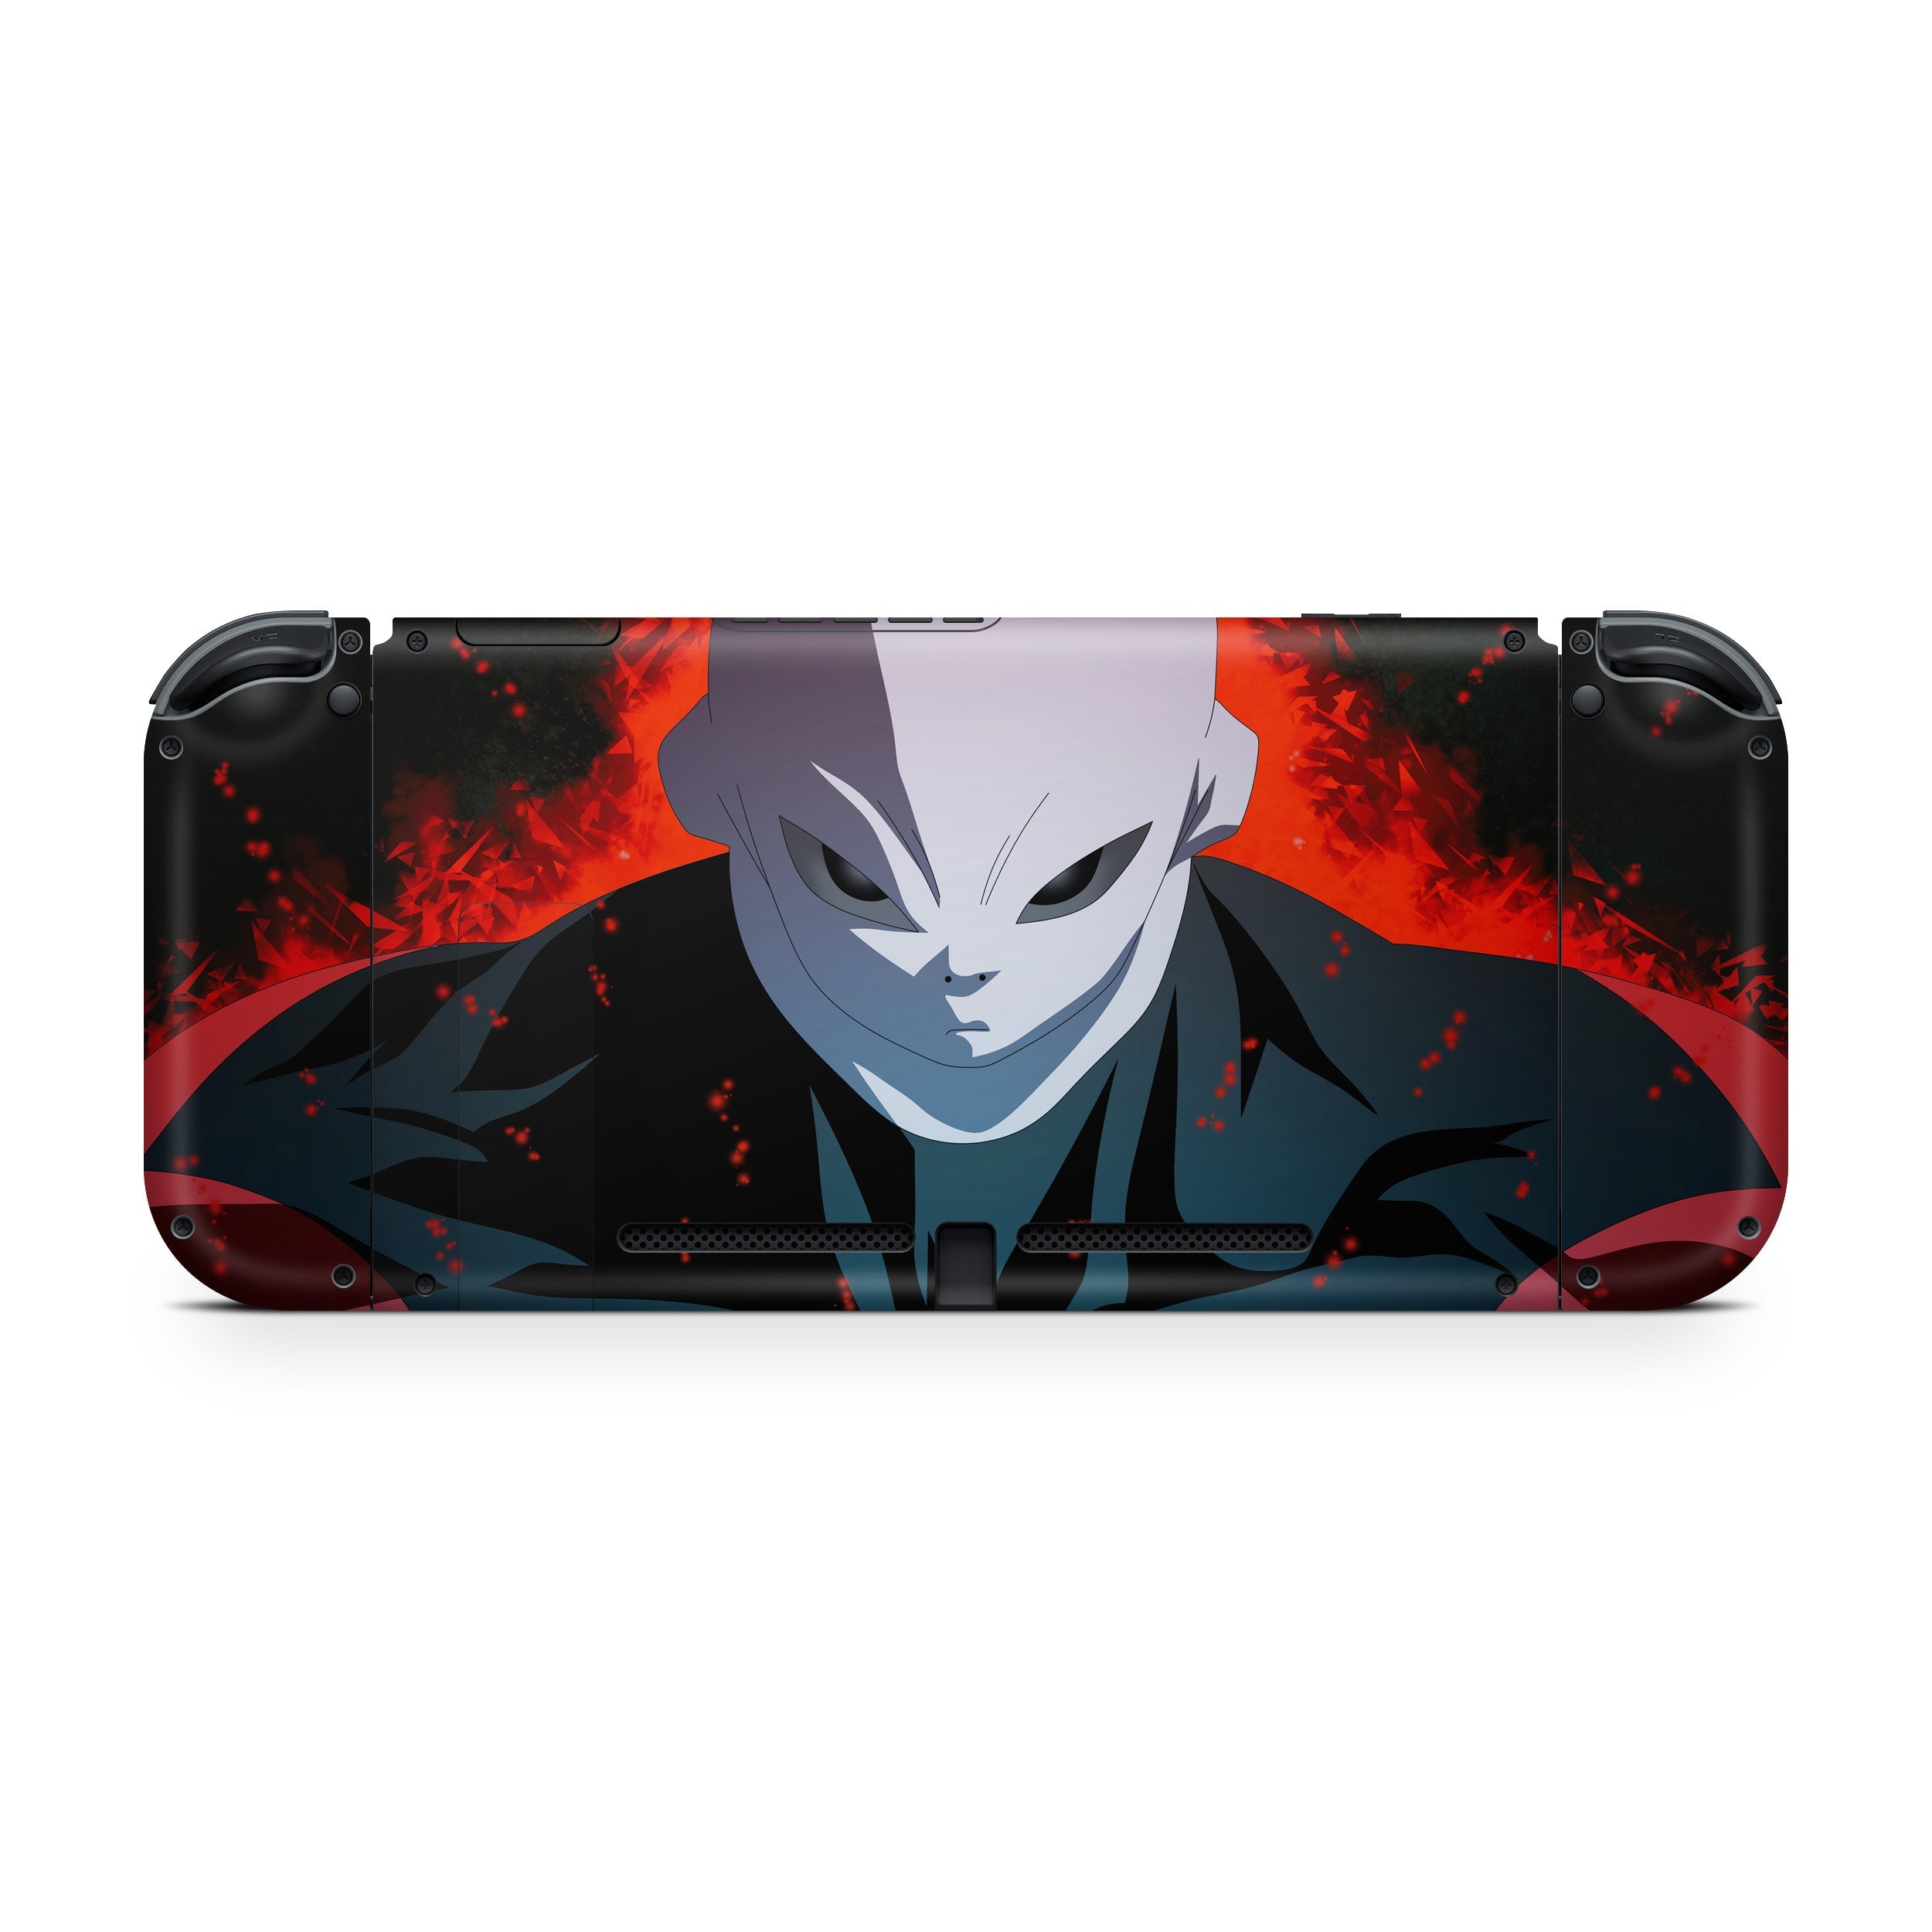 A video game skin featuring a Dragon Ball Super Jiren design for the Nintendo Switch.